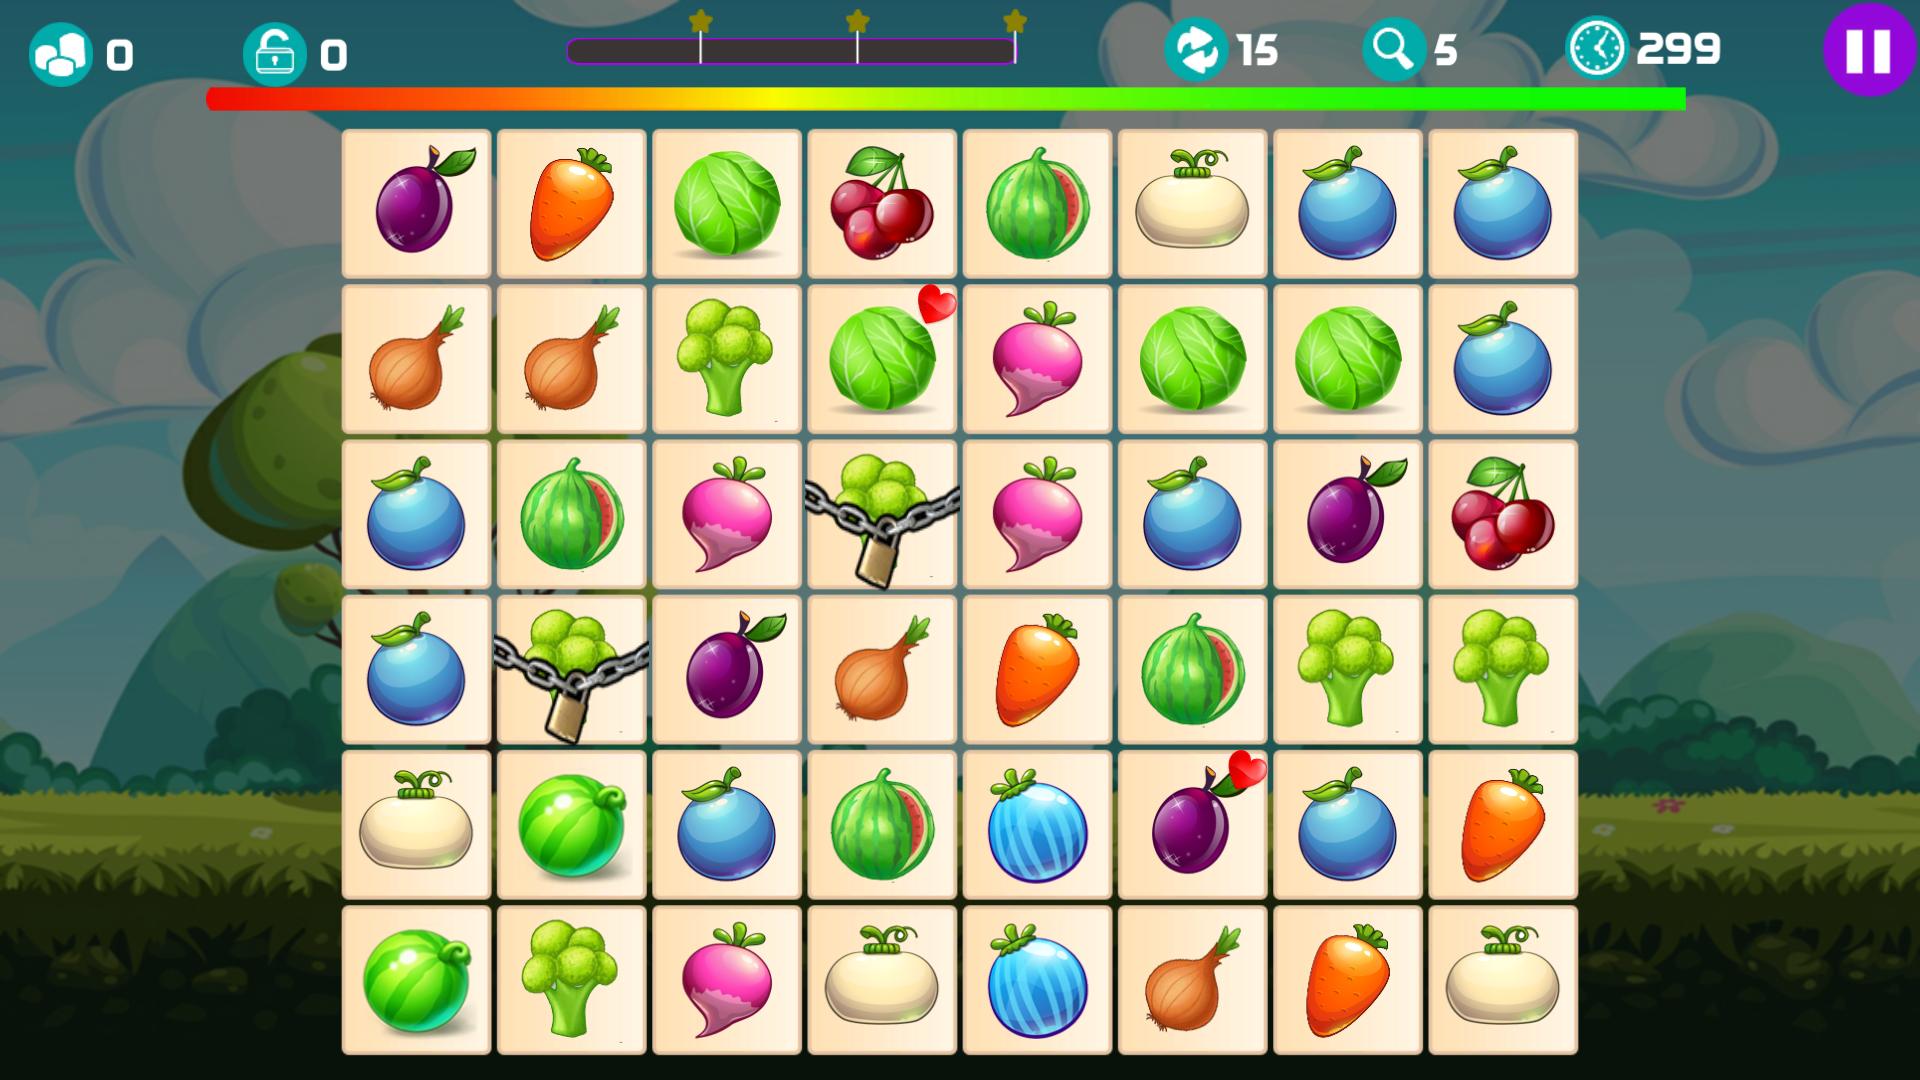 One fruit game. Игра Fruit connect 2. Fruit connect игра. Игра Соедини фрукты.